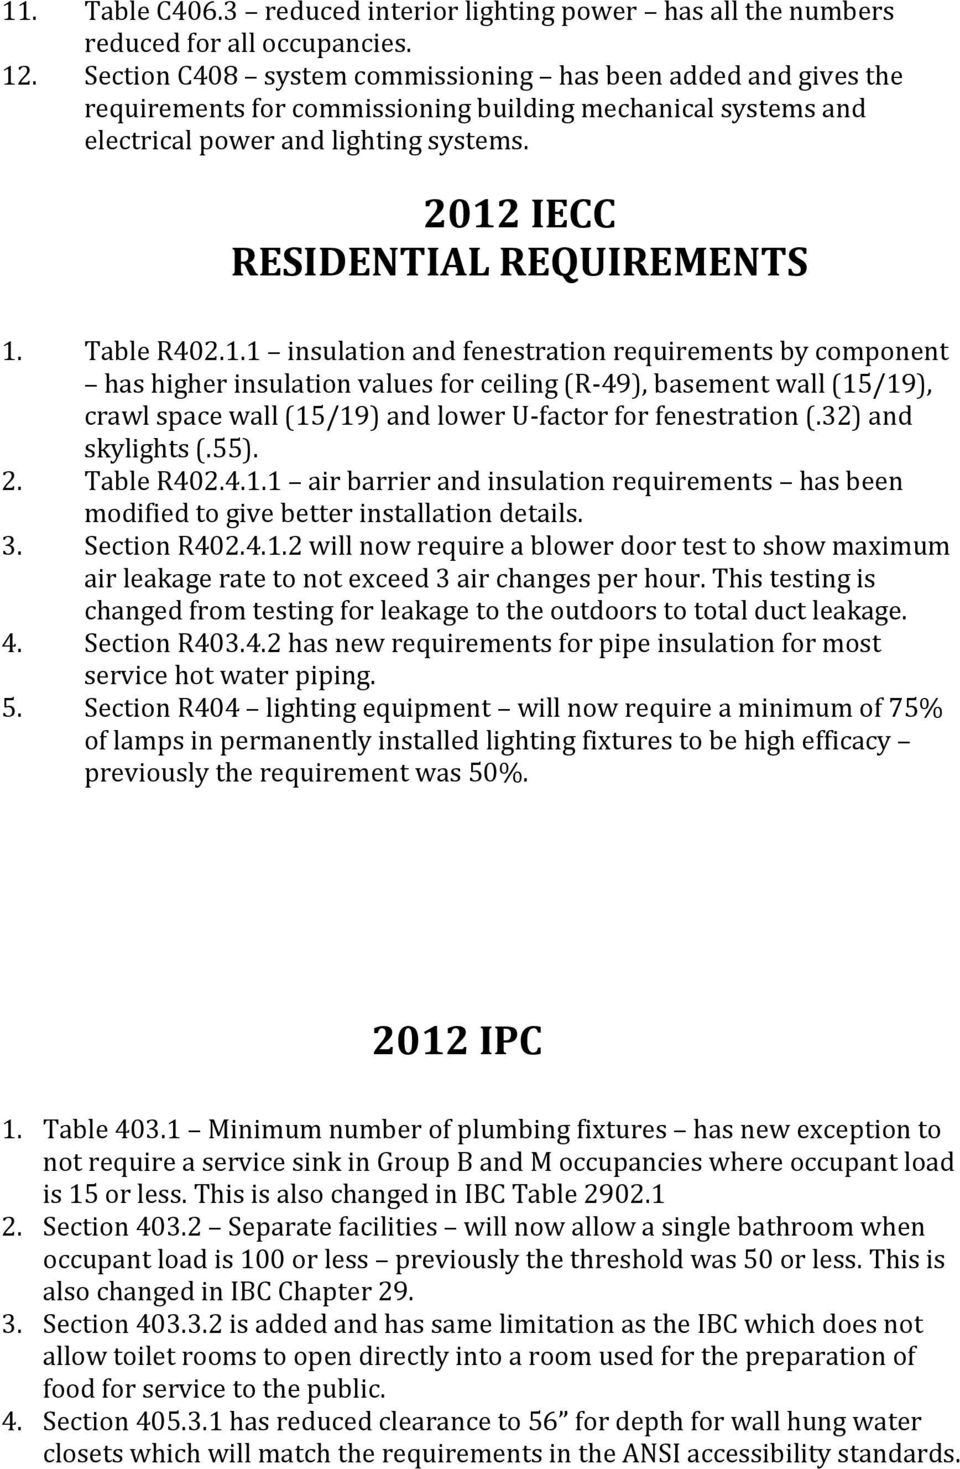 2012 IECC RESIDENTIAL REQUIREMENTS 1. Table R402.1.1 insulation and fenestration requirements by component has higher insulation values for ceiling (R-49), basement wall (15/19), crawl space wall (15/19) and lower U-factor for fenestration (.